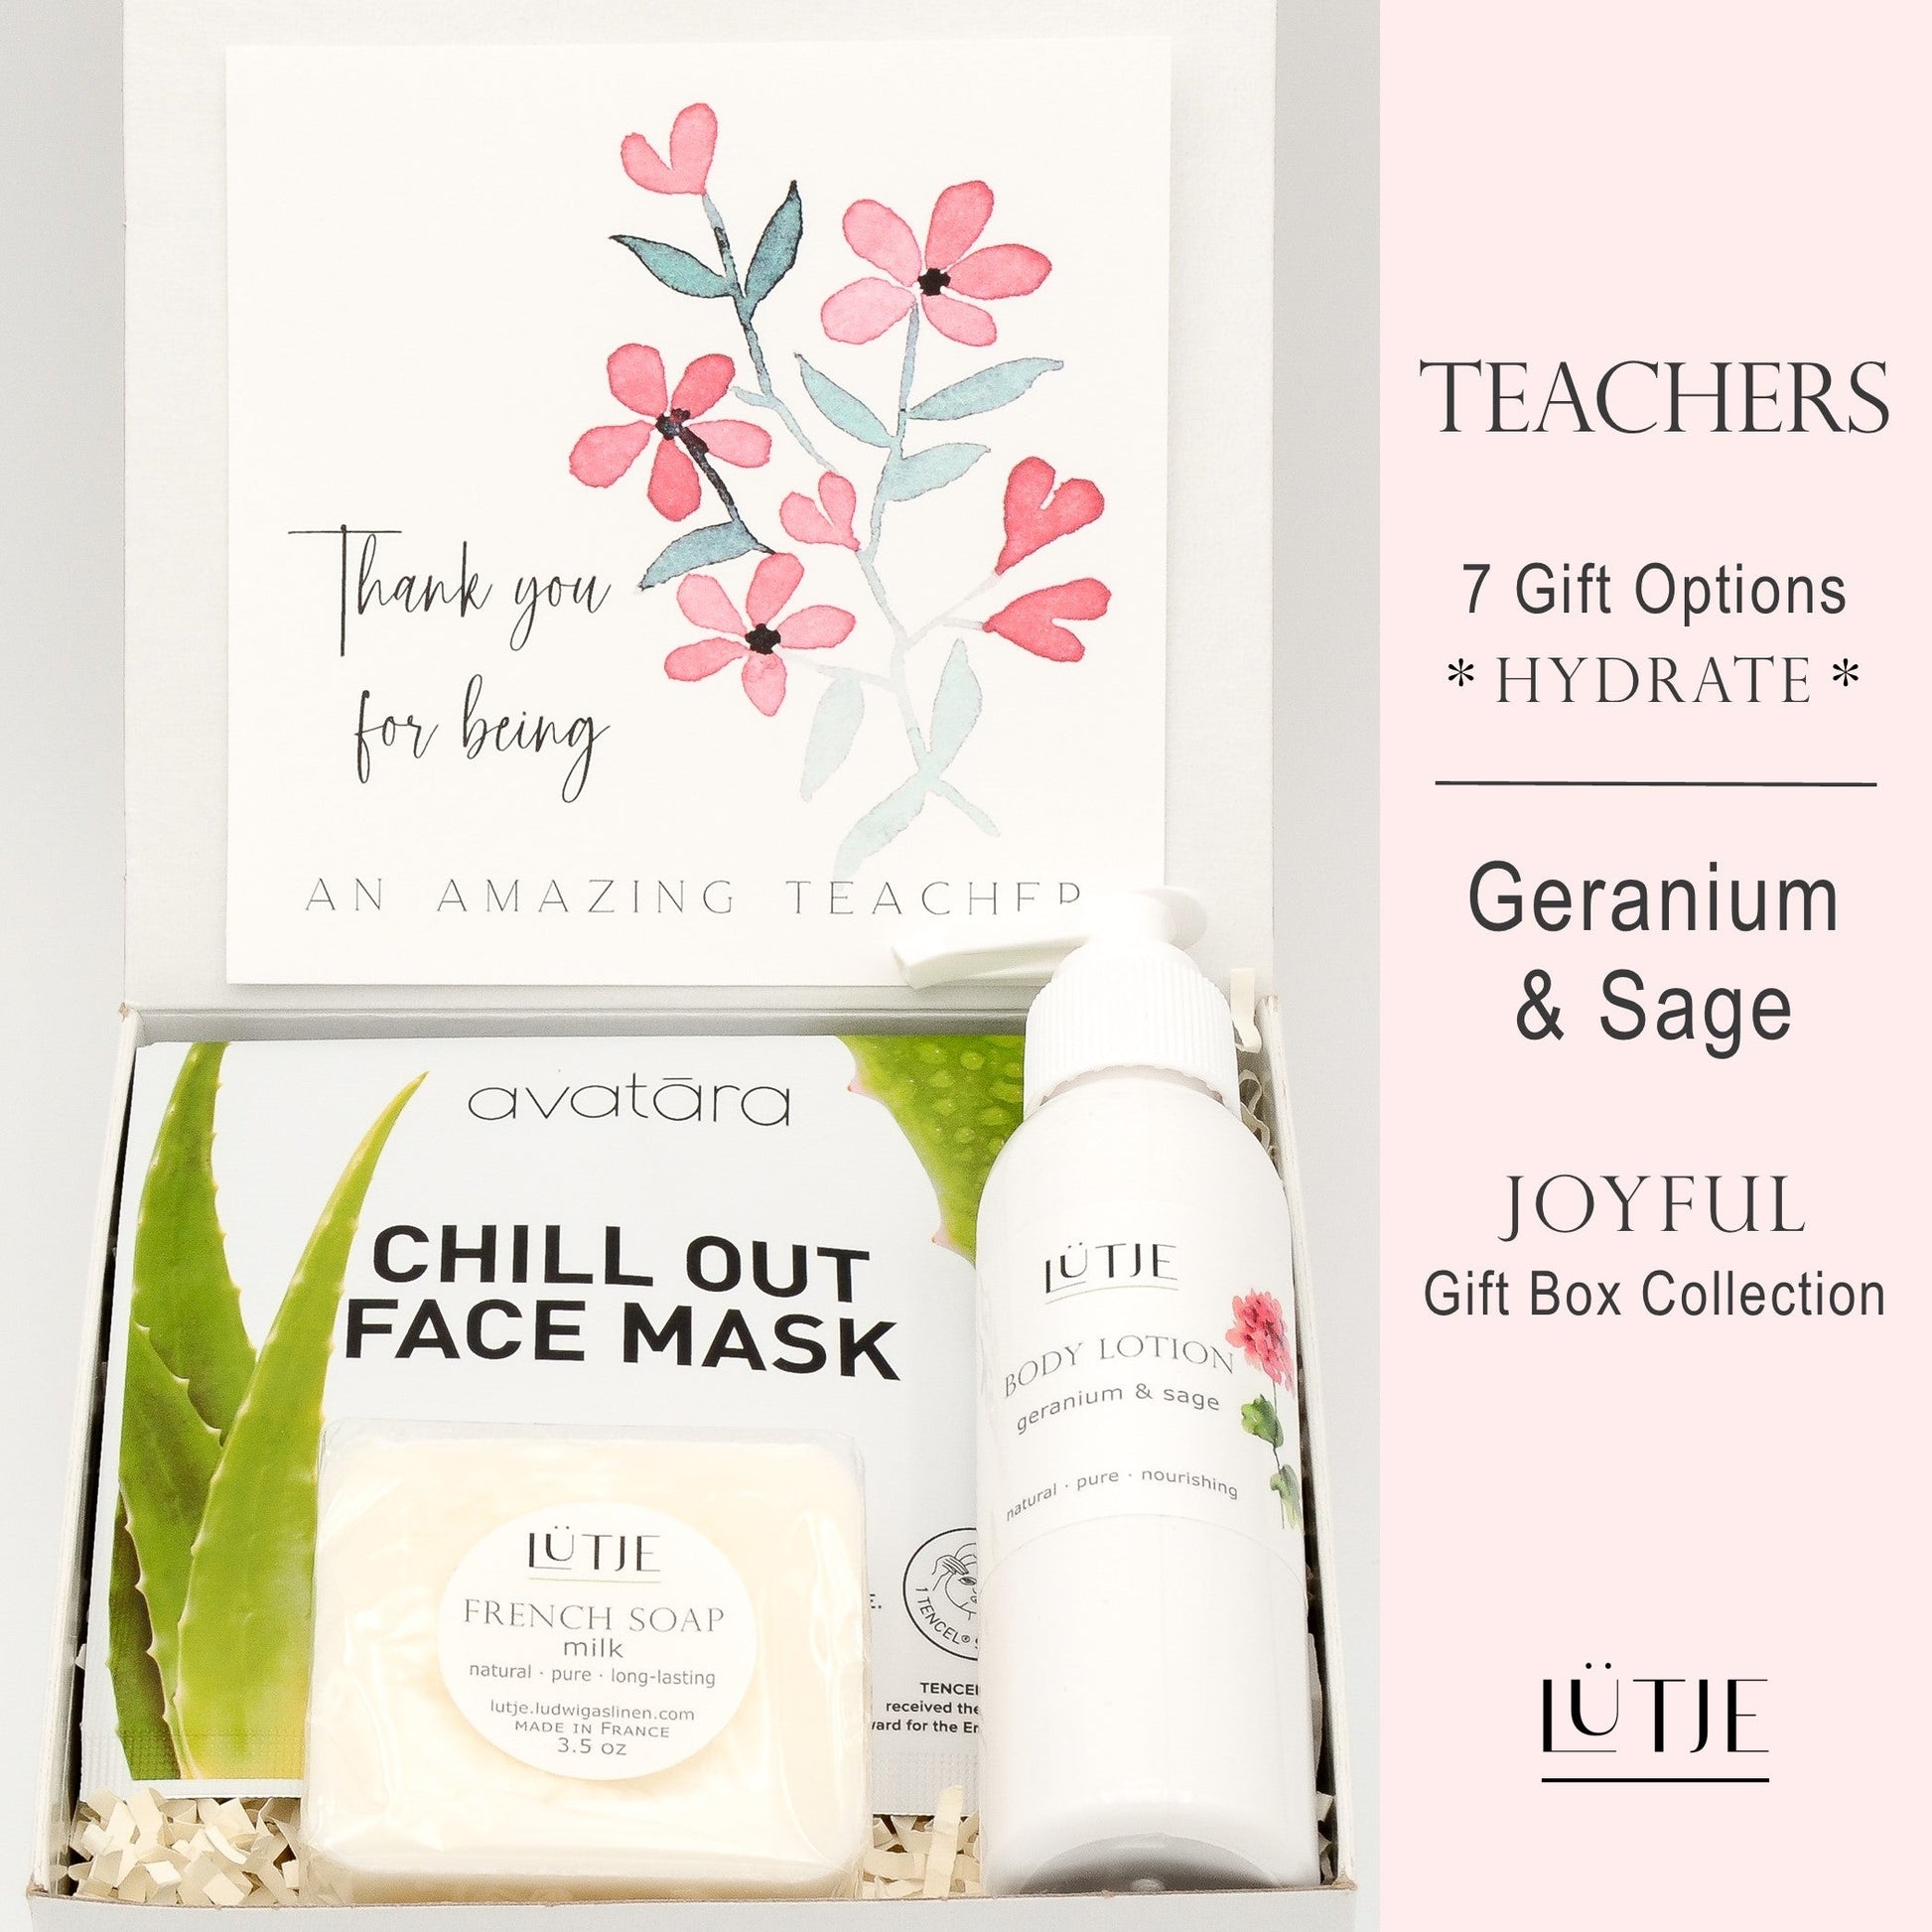 Gift Box for women, wife, daughter, BFF, sister, mom, or grandma, includes Geranium & Sage hand lotion spray and body lotion, essential oil, lip balm, soothing muscle balm, Bergamot & Pear room & linen spray, French soap, French bath salts, hydrating face mask, other bath, spa and self-care items, and 18K gold-plated necklace with engraved heart.